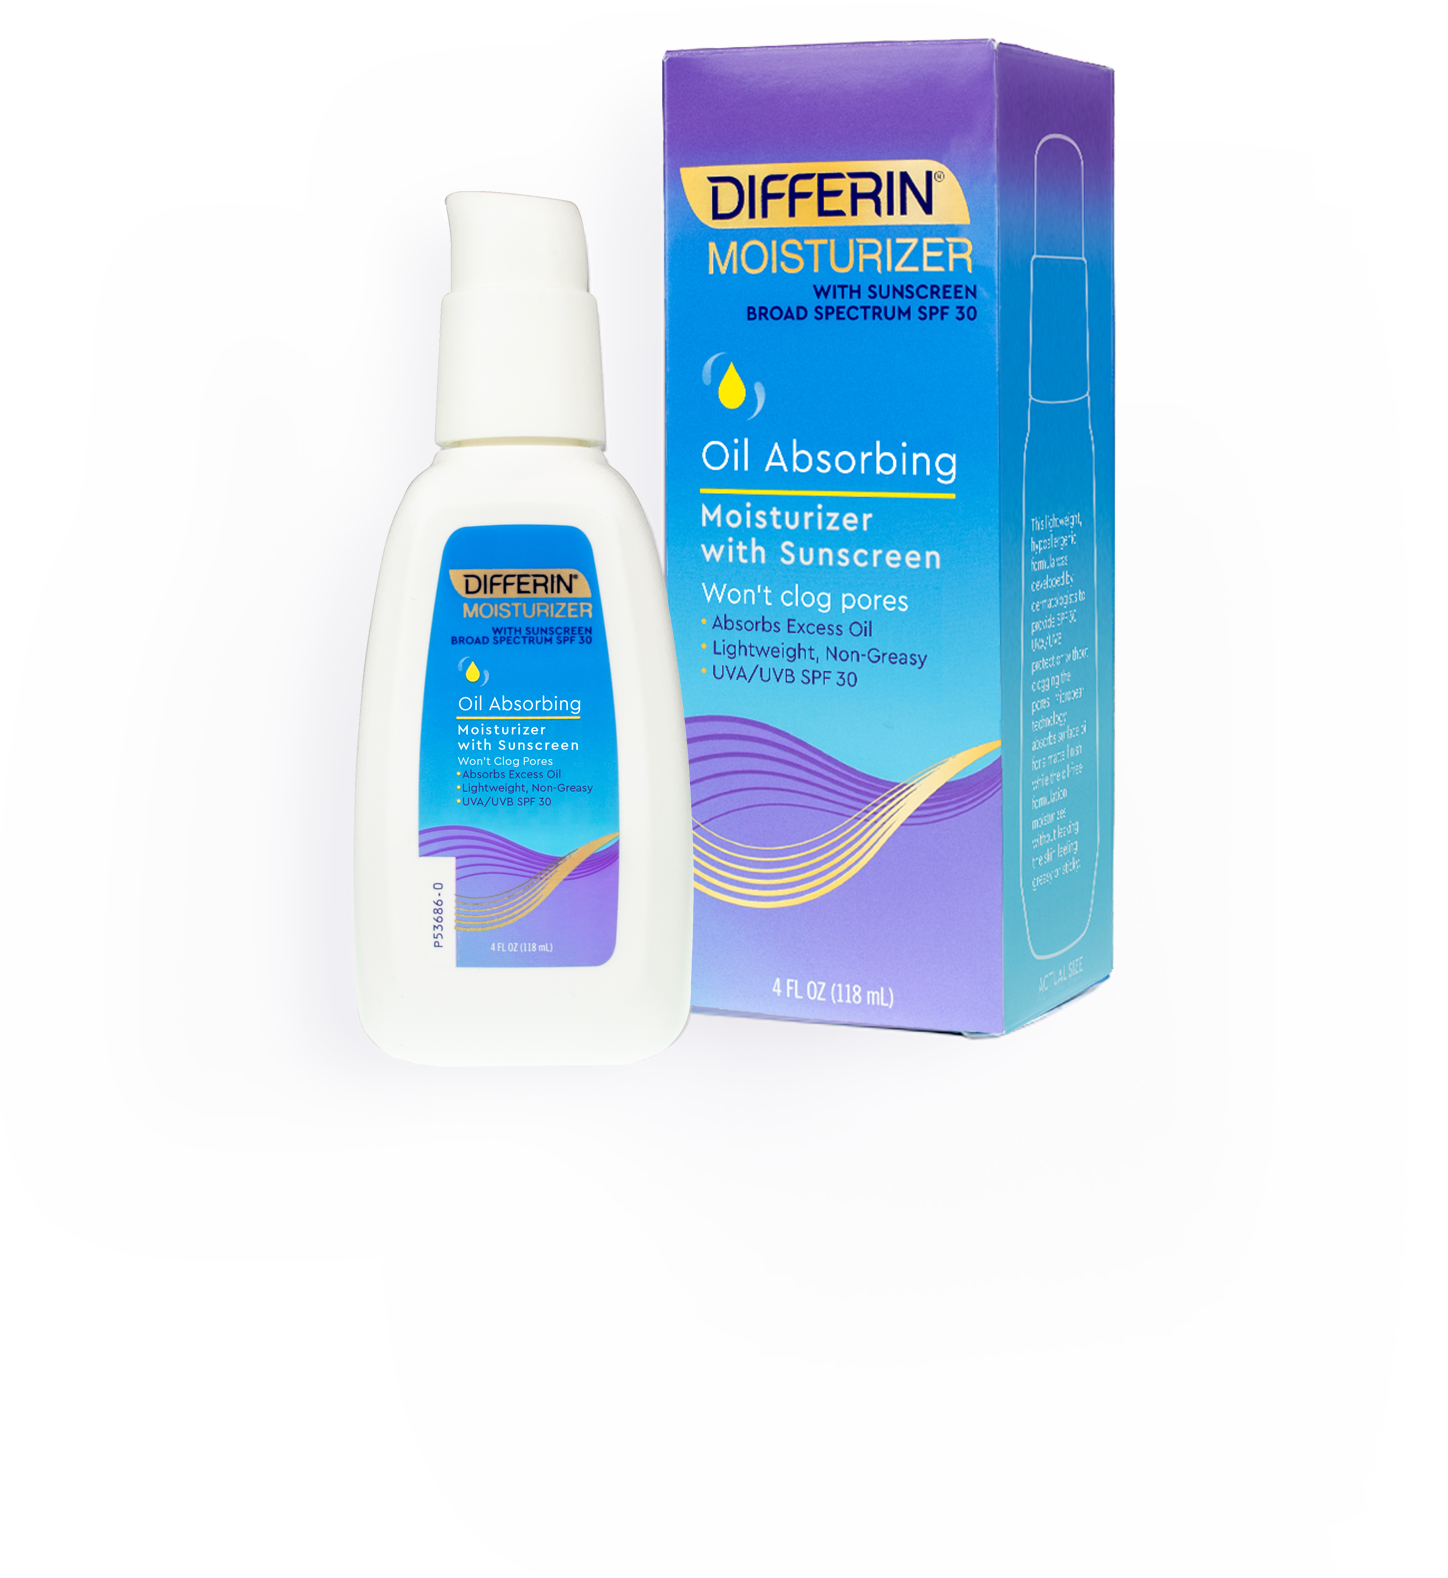 Differin Oil Absorbing Moisturizer: provides daily sun protection, soothes skin from drying effects of some acne treatments.